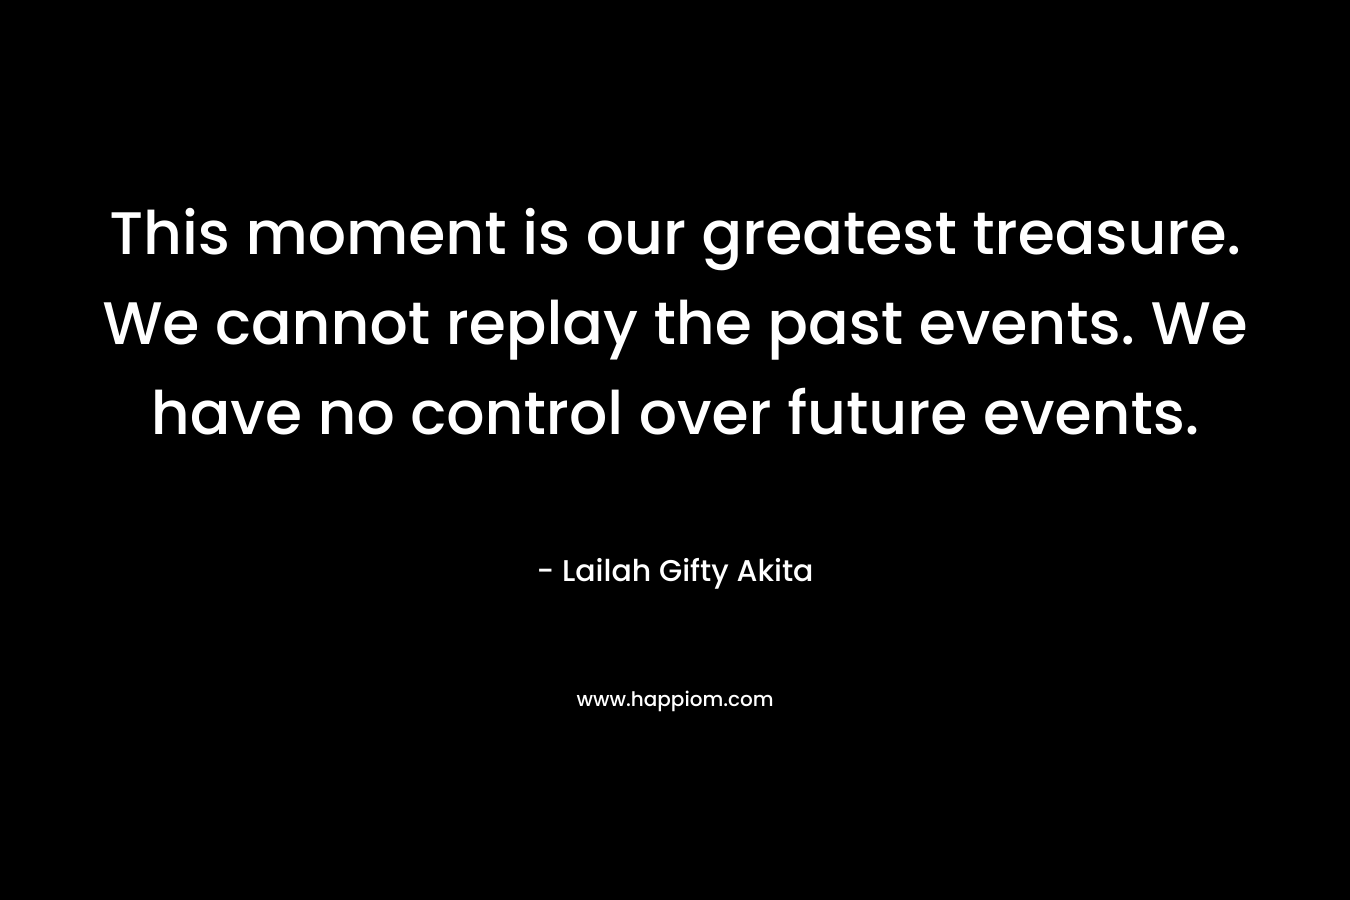 This moment is our greatest treasure. We cannot replay the past events. We have no control over future events.